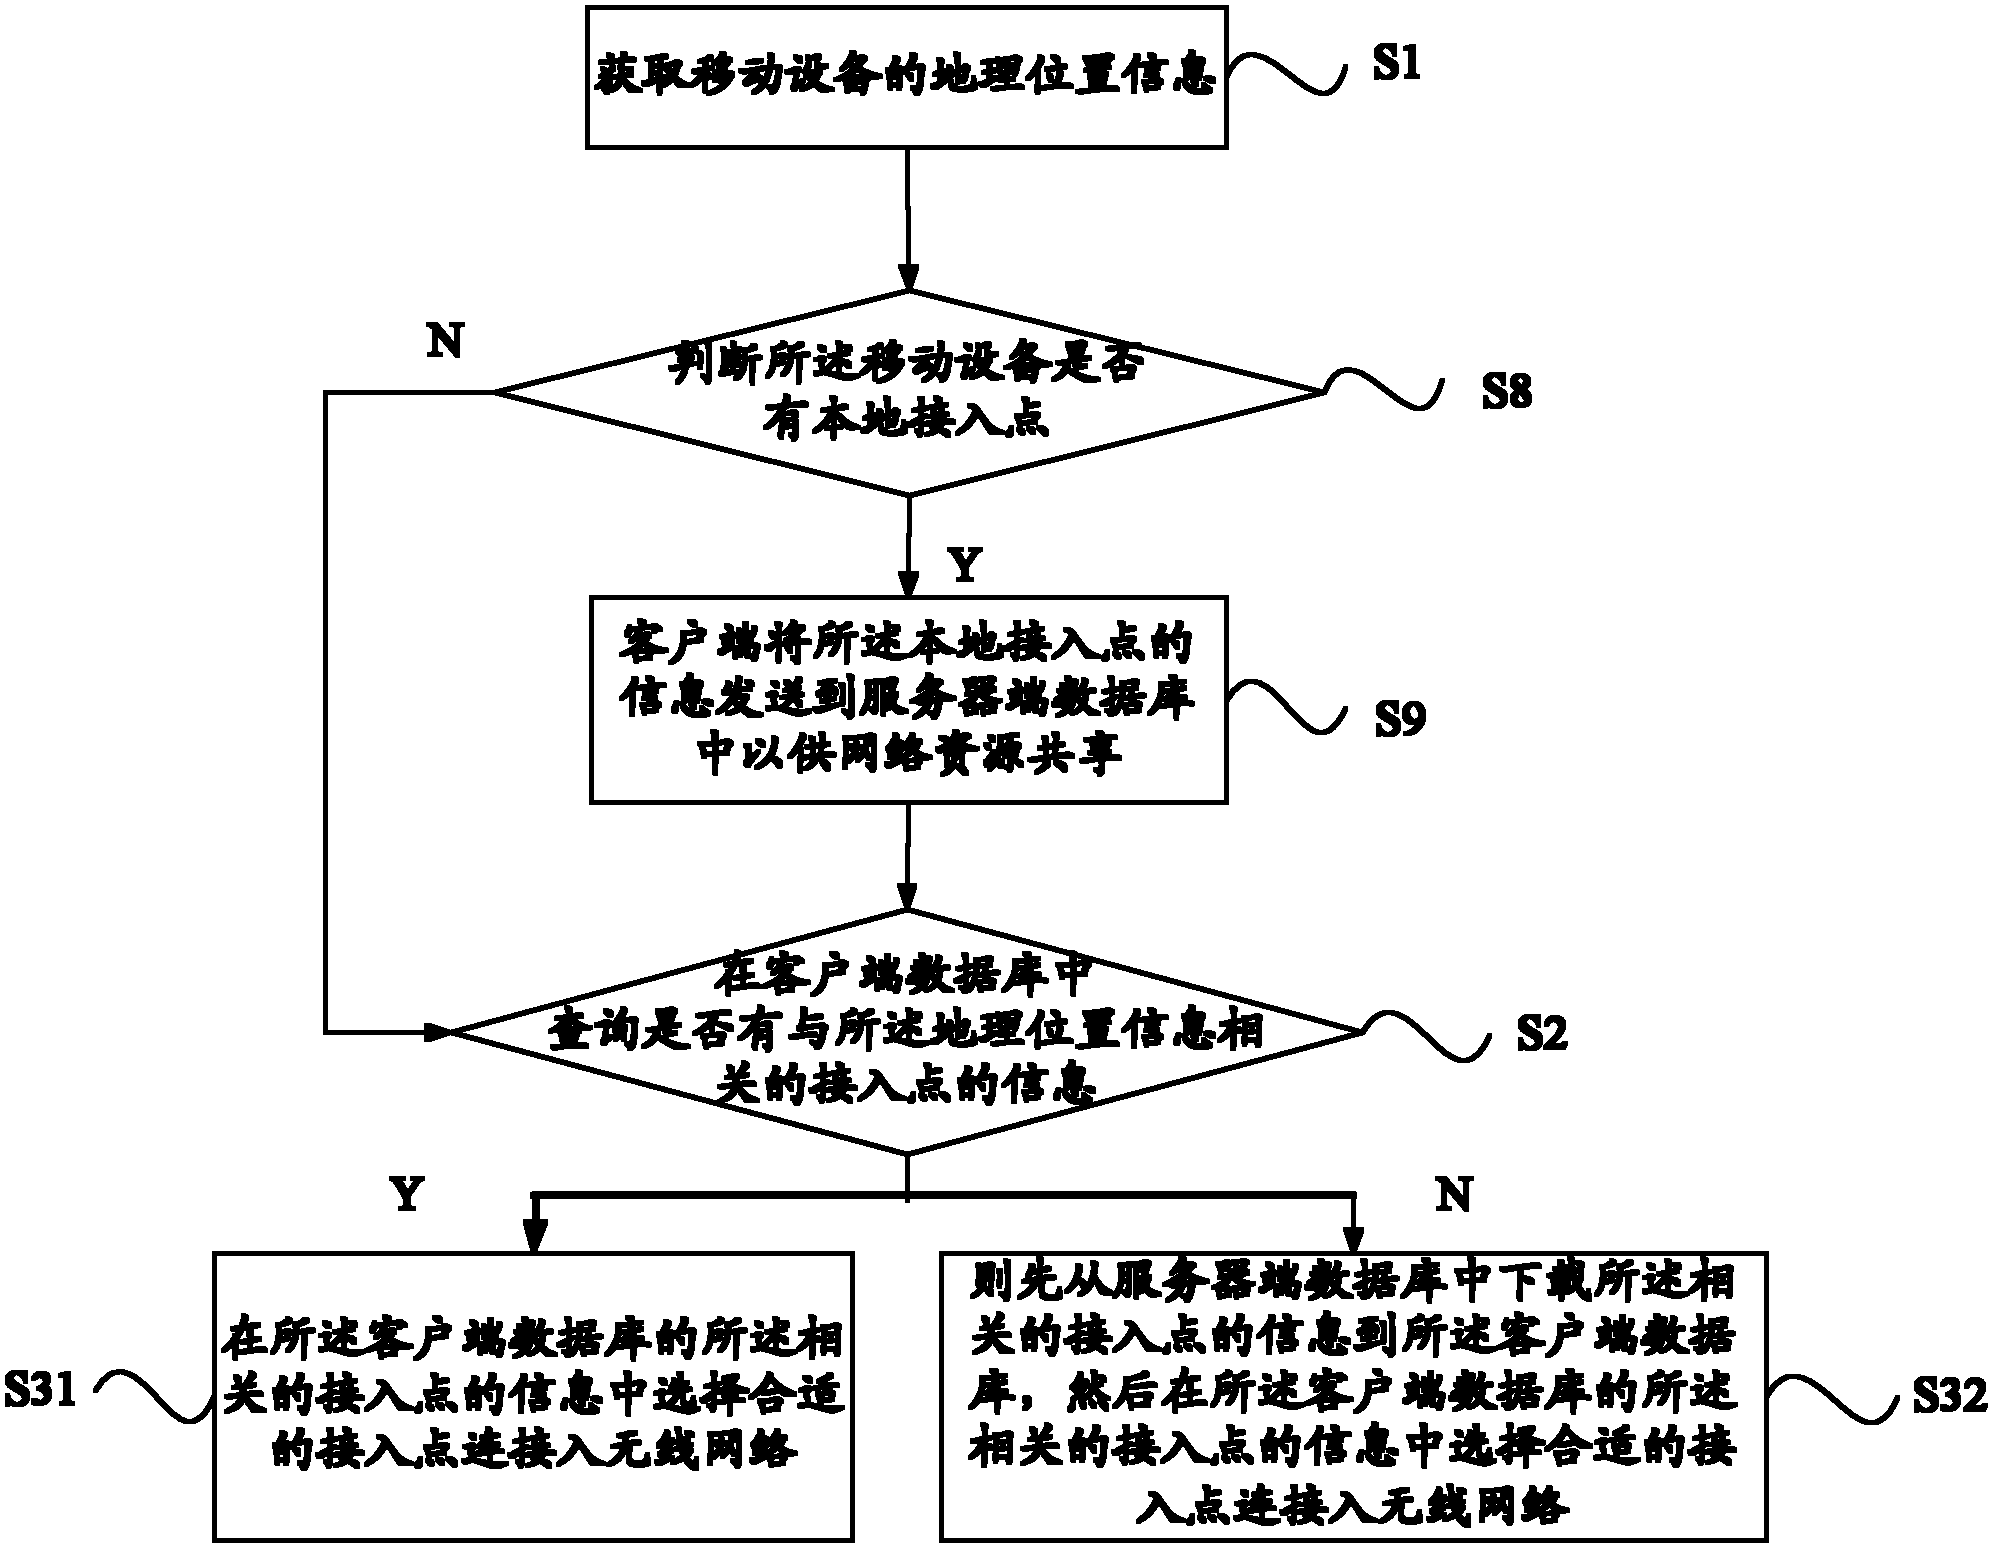 Method and system for obtaining wireless access point